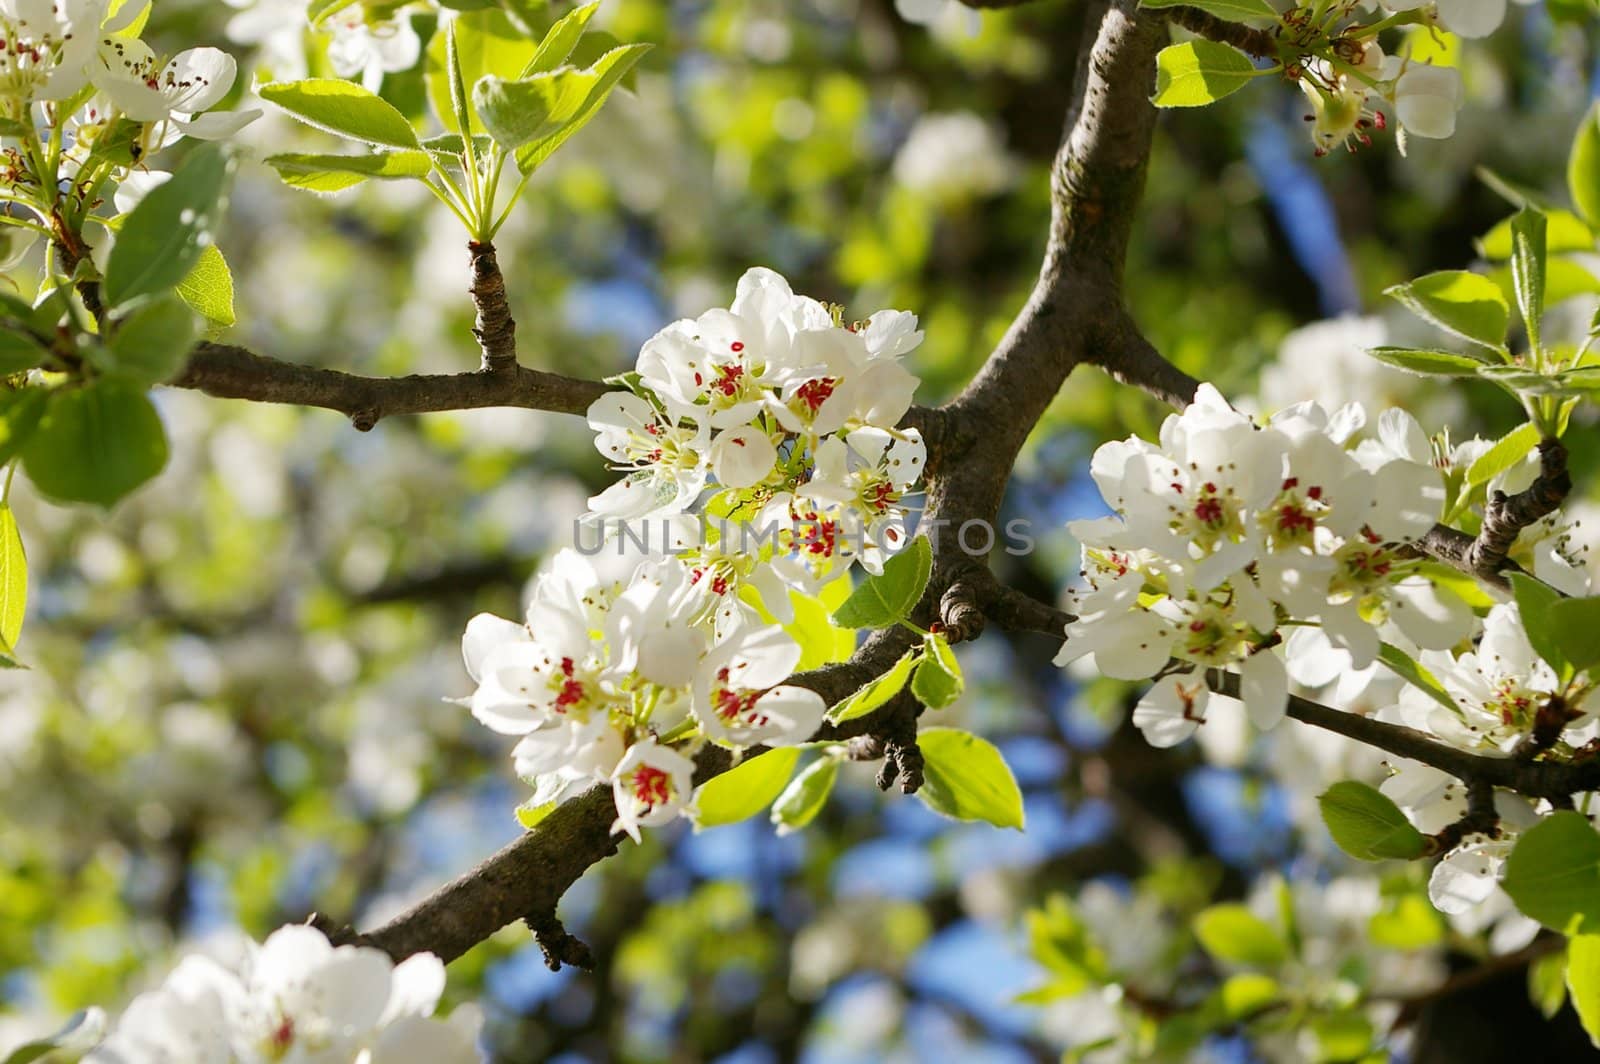 Branch with blossoms of white pear flowers and green leafs at spring